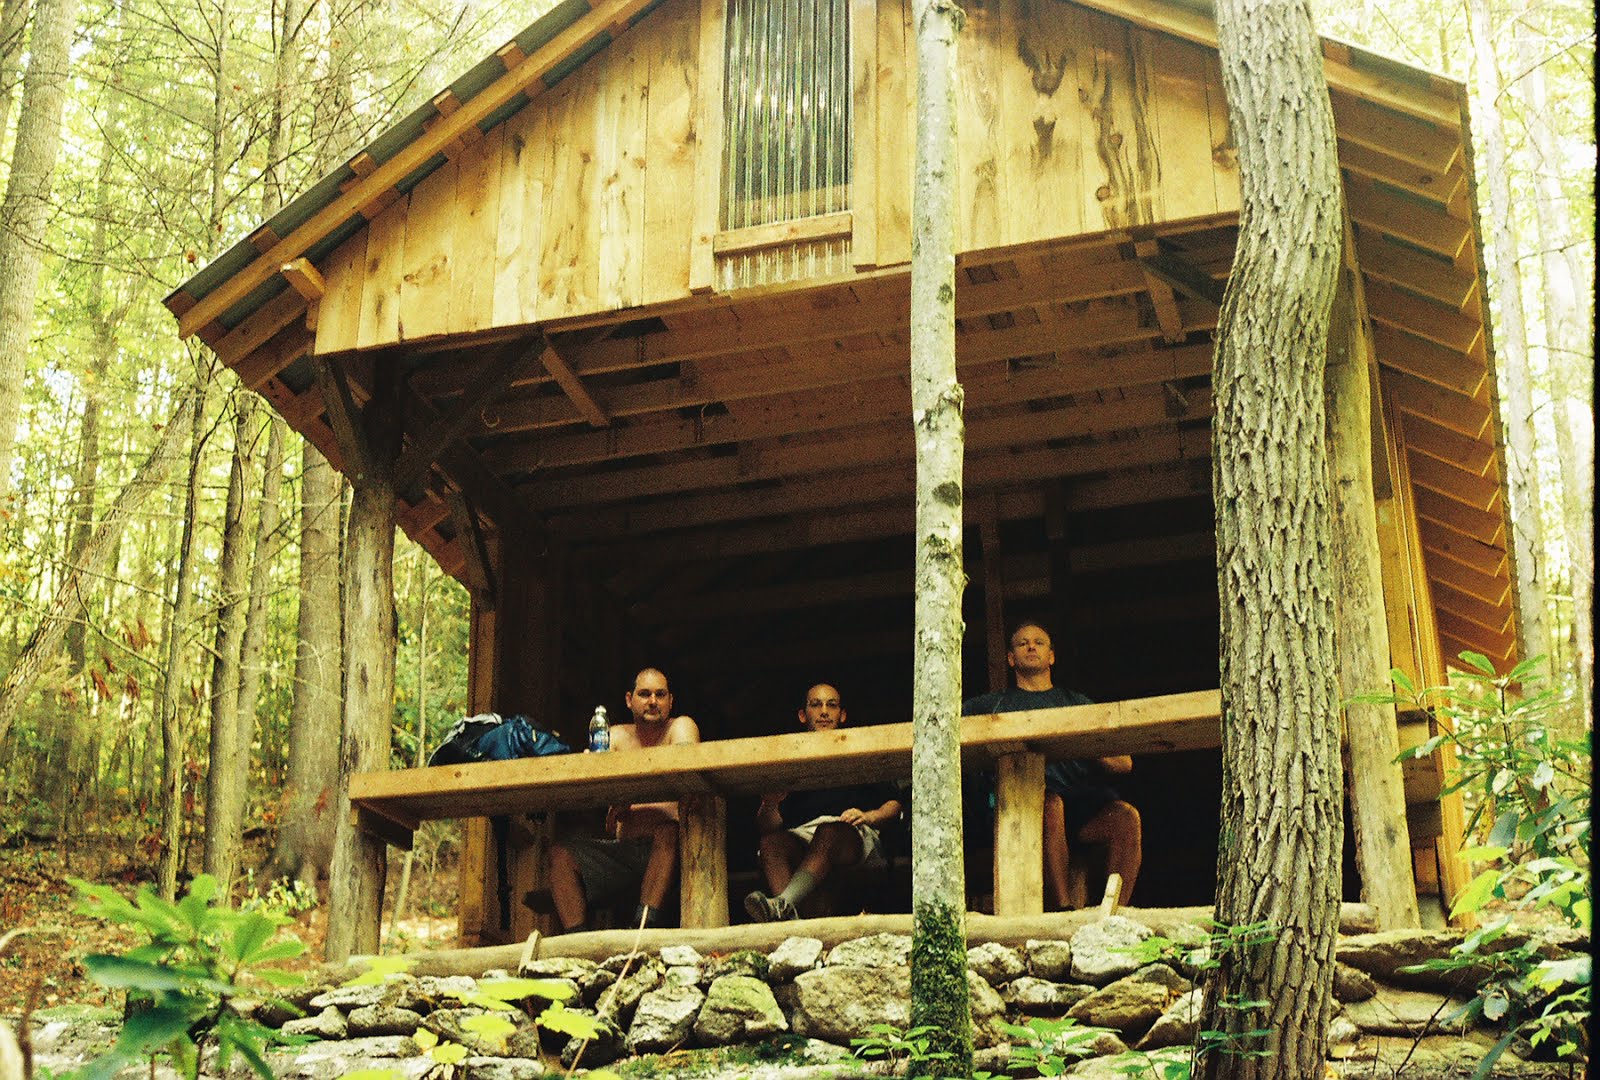 Mountaineer Shelter